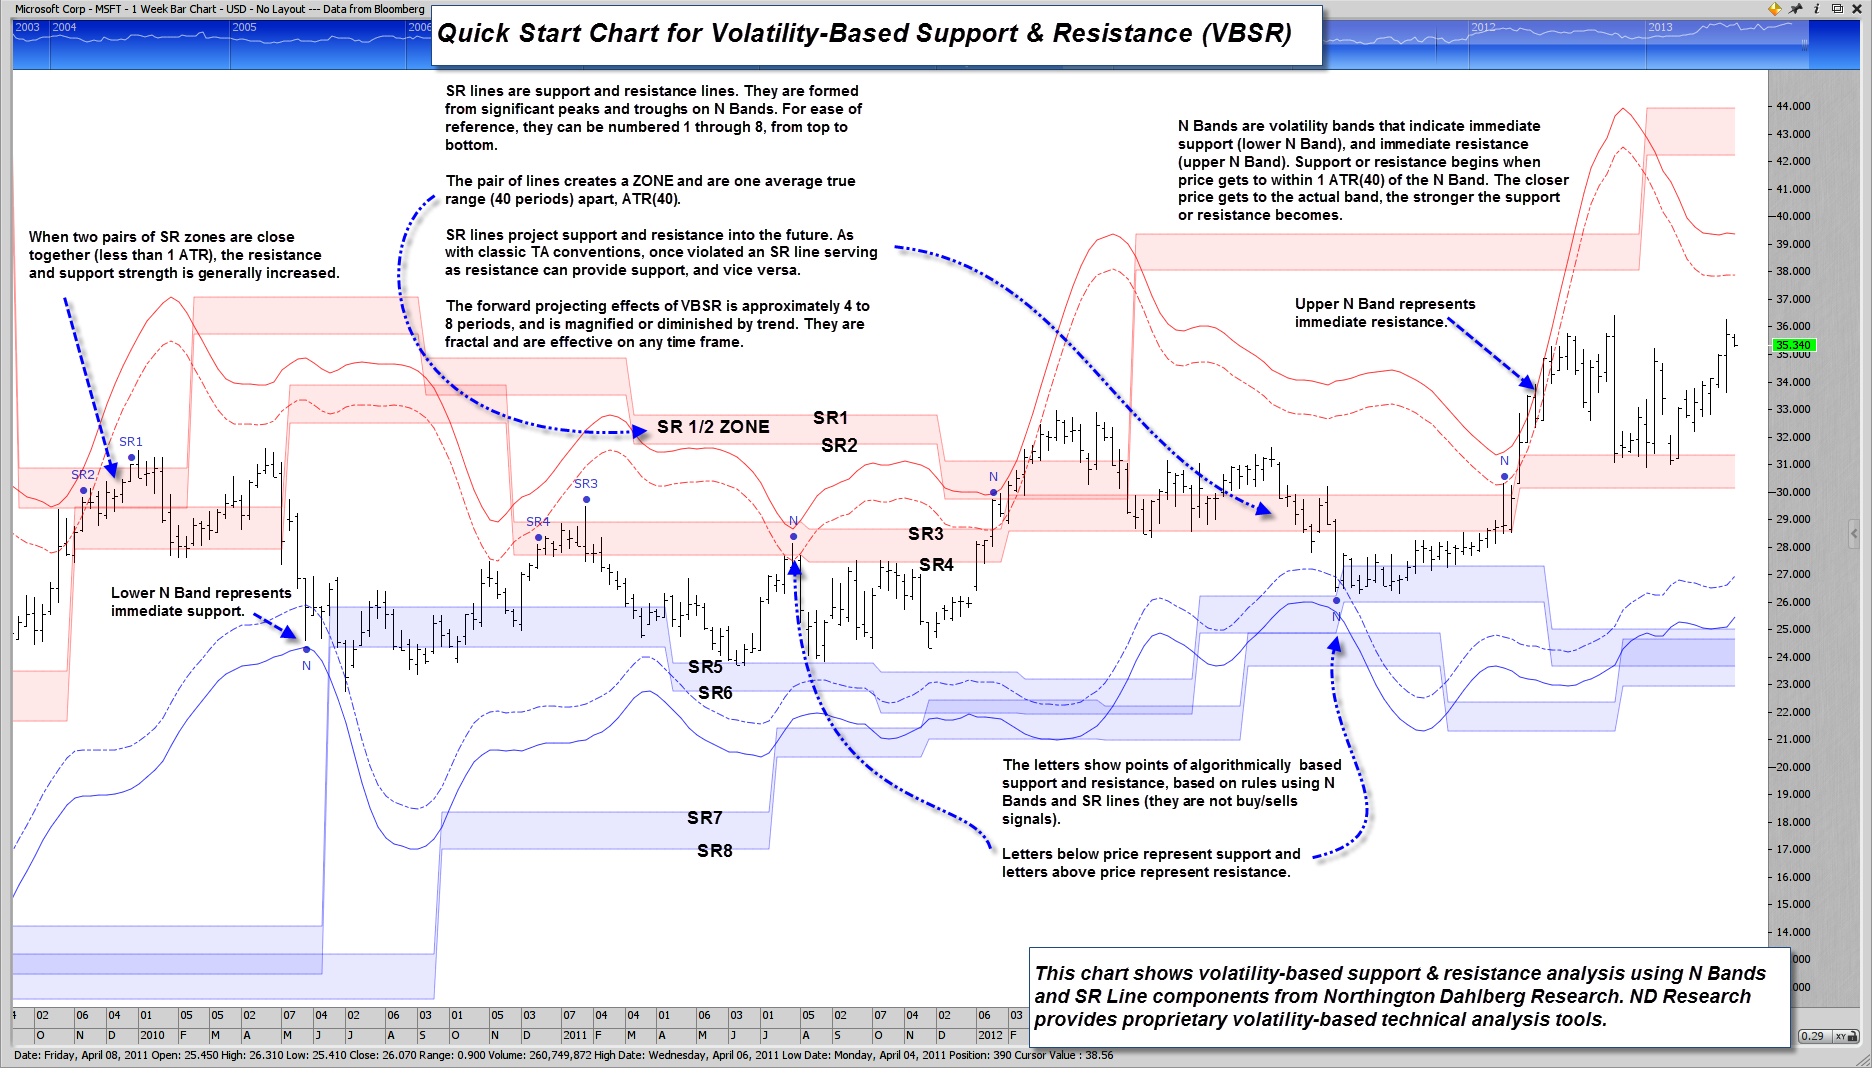 Volatility Based Support & Resistance 1